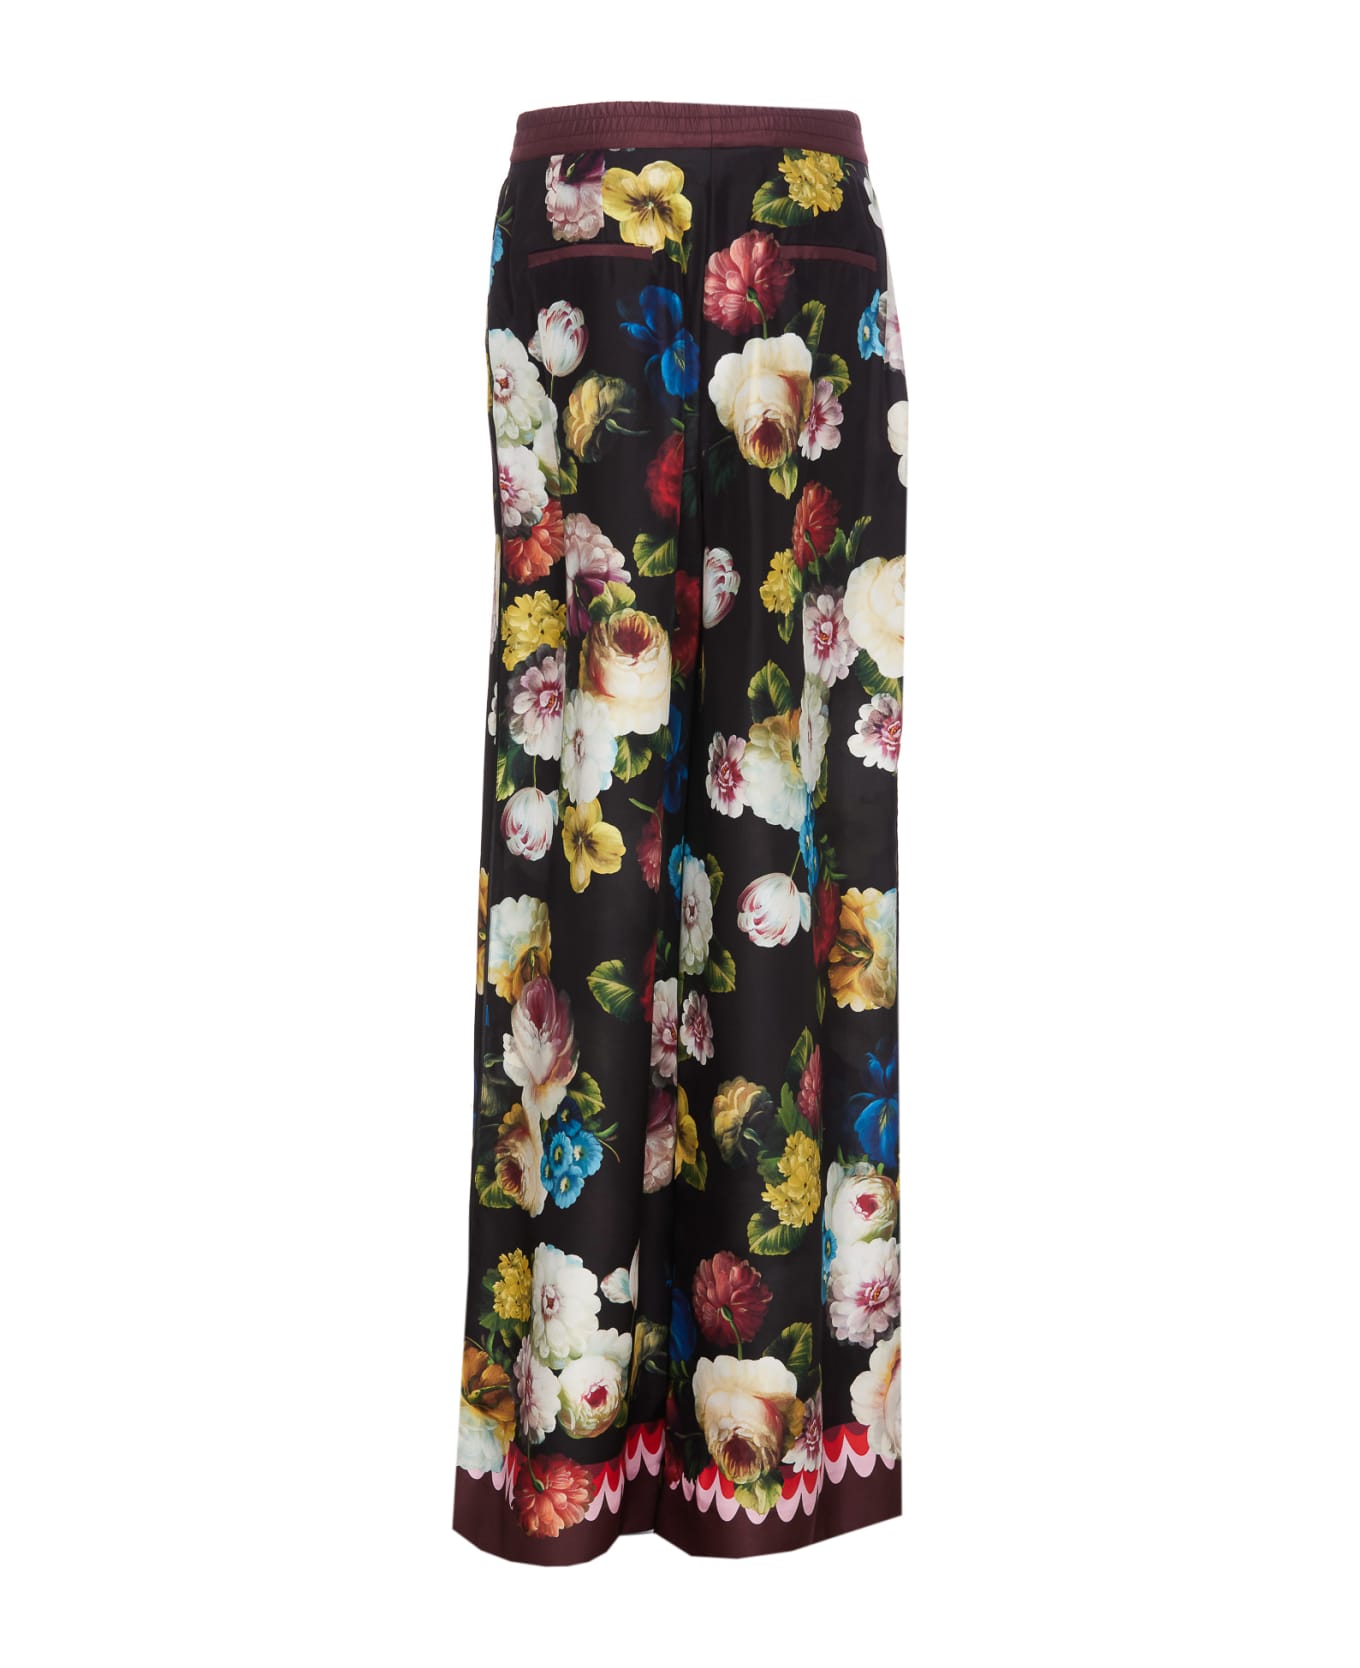 Dolce & Gabbana Pants With Floral Print - black ボトムス